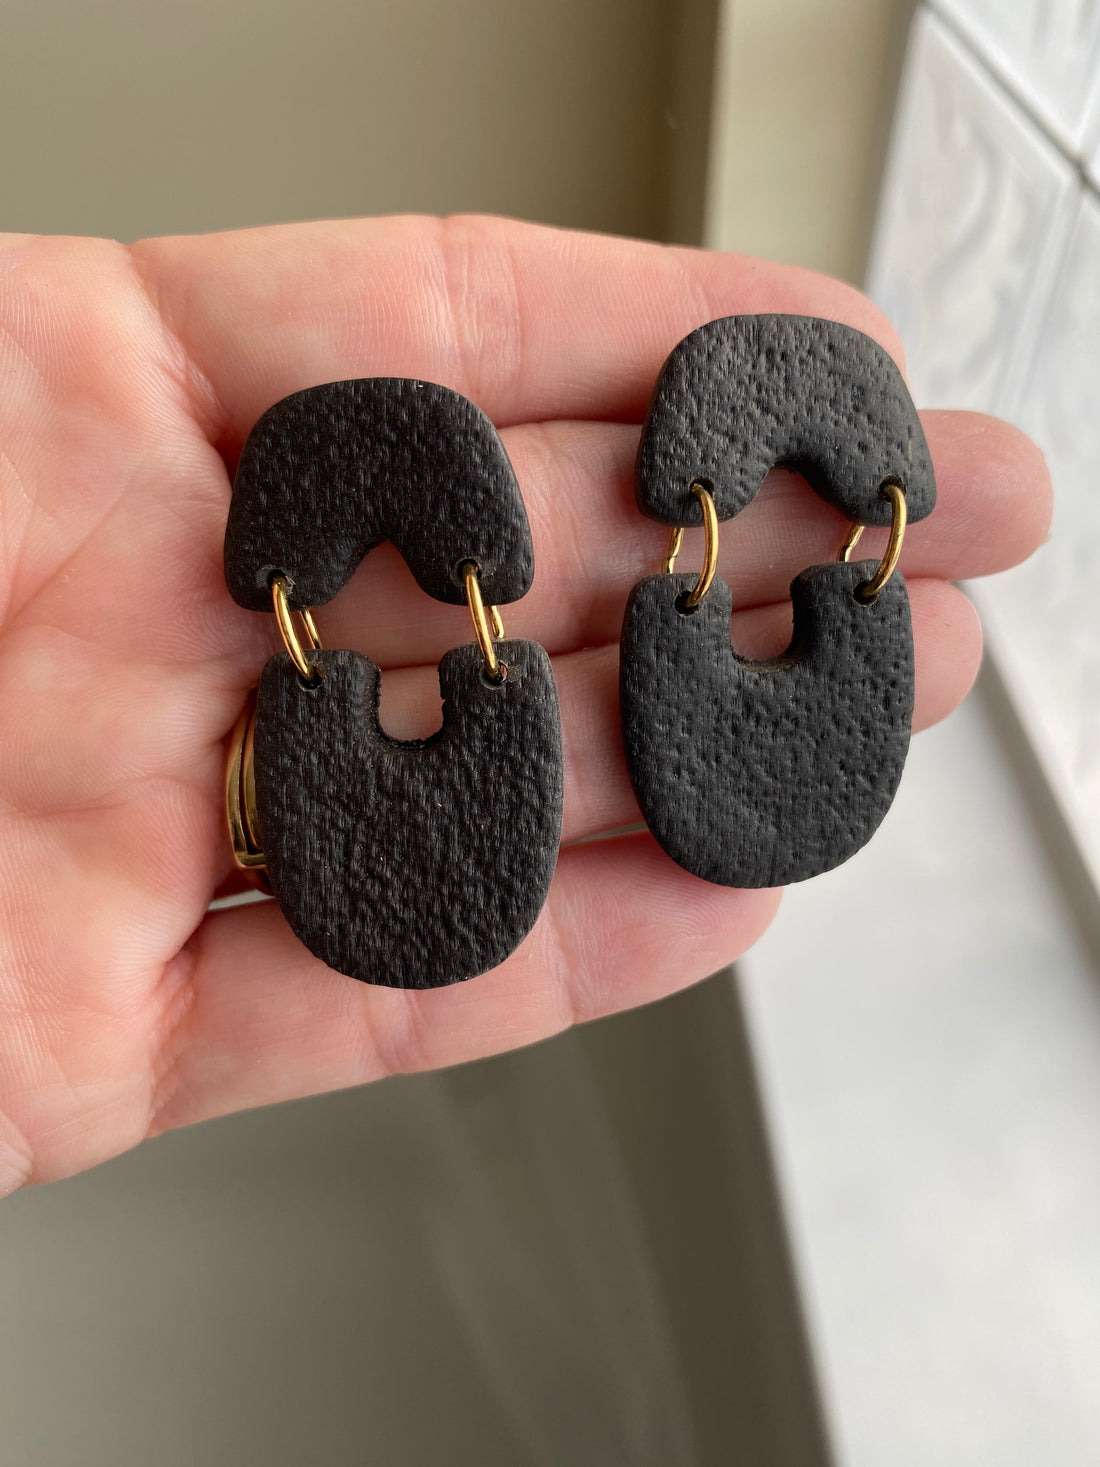 Looking for a unique pair of earrings to wear?